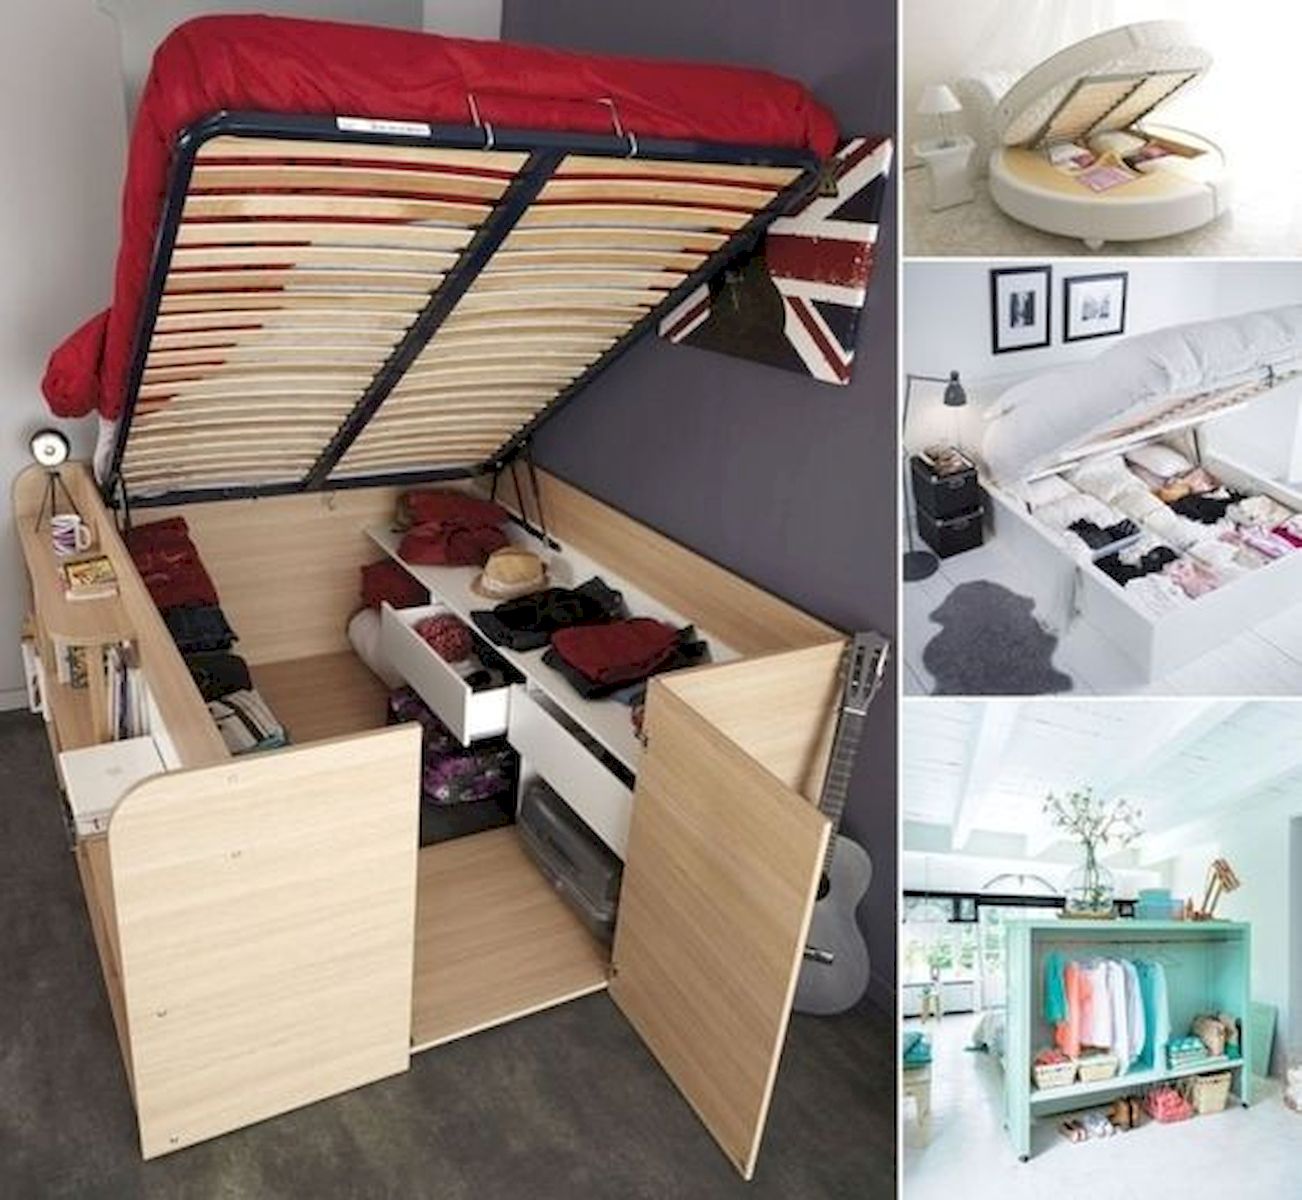 60 Brilliant Space Saving Ideas For Small Bedroom (38)